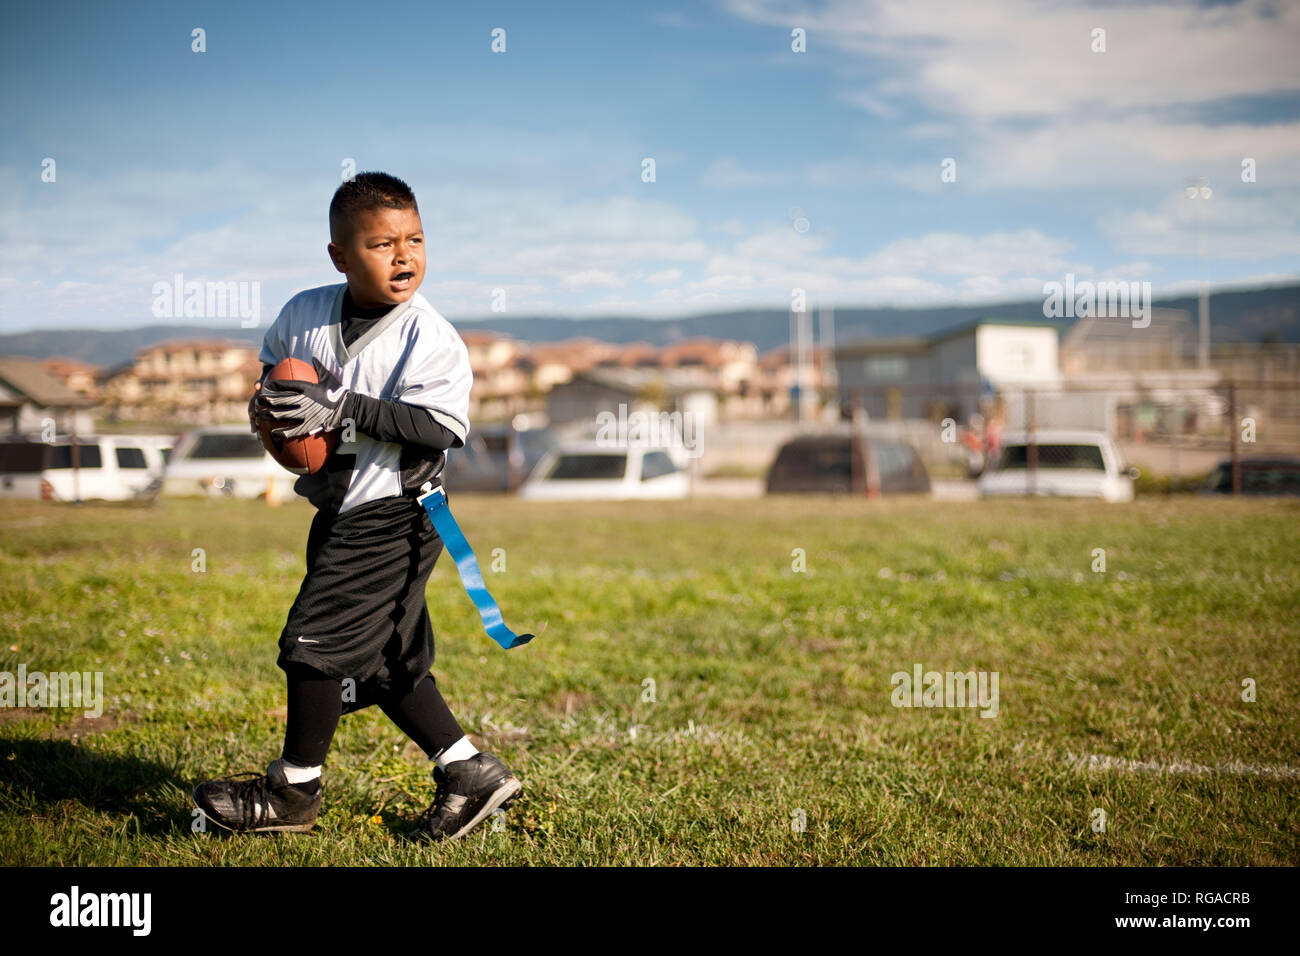 Boy carrying a football while wearing an over sized sports uniform on a sports field. Stock Photo